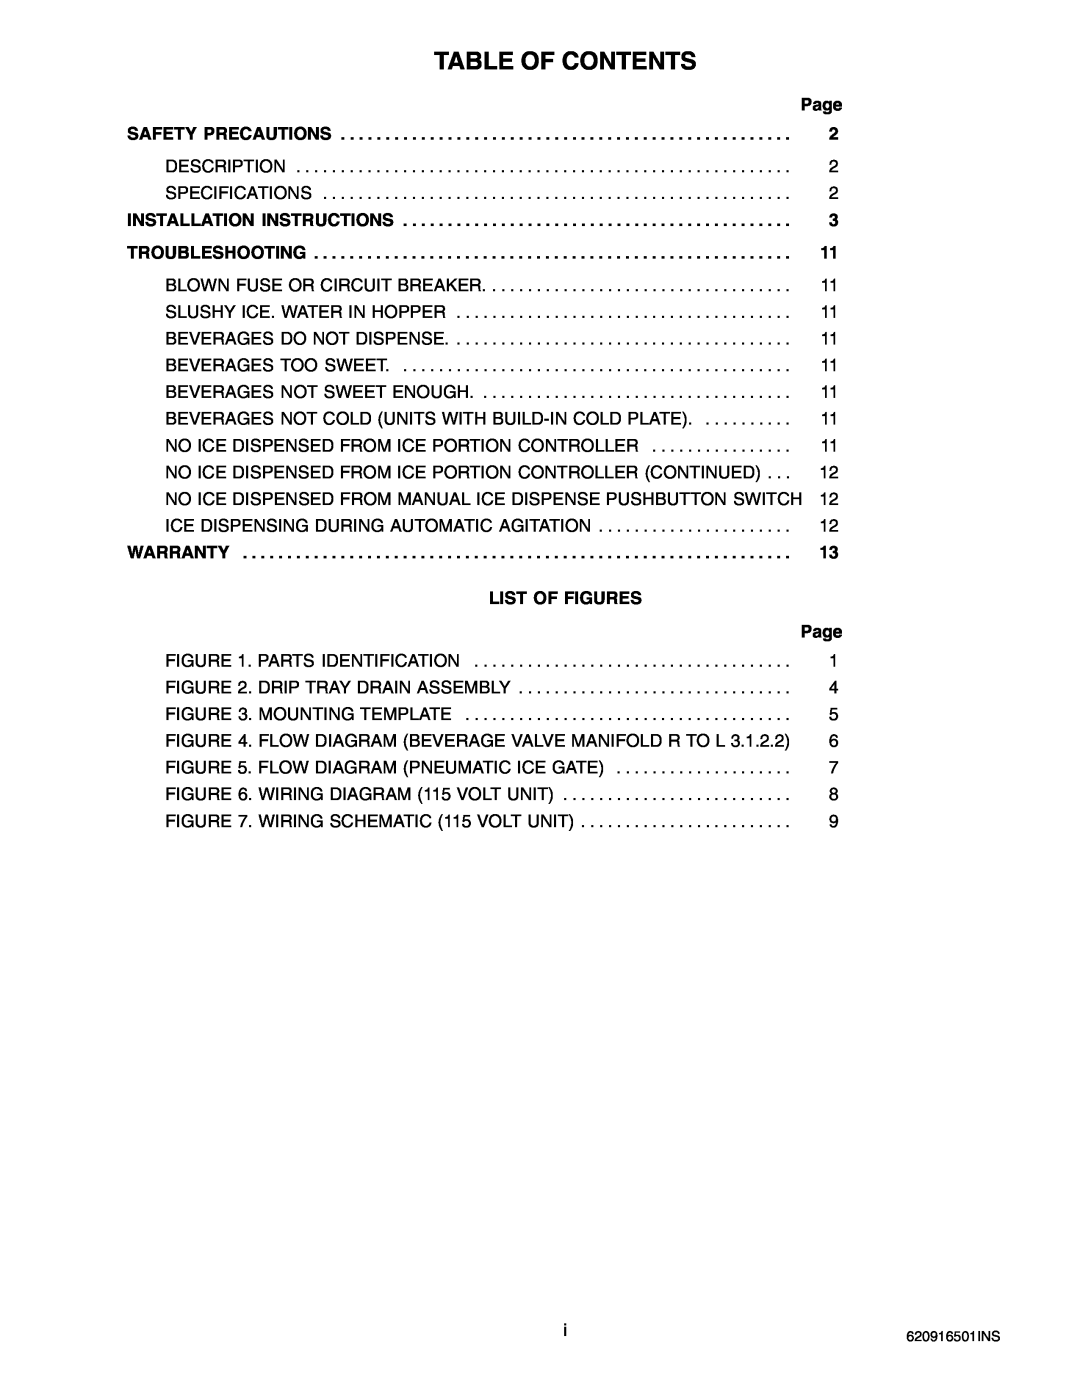 Cornelius ED-250 BCP installation manual Table Of Contents, Page SAFETY PRECAUTIONS, List Of Figures 